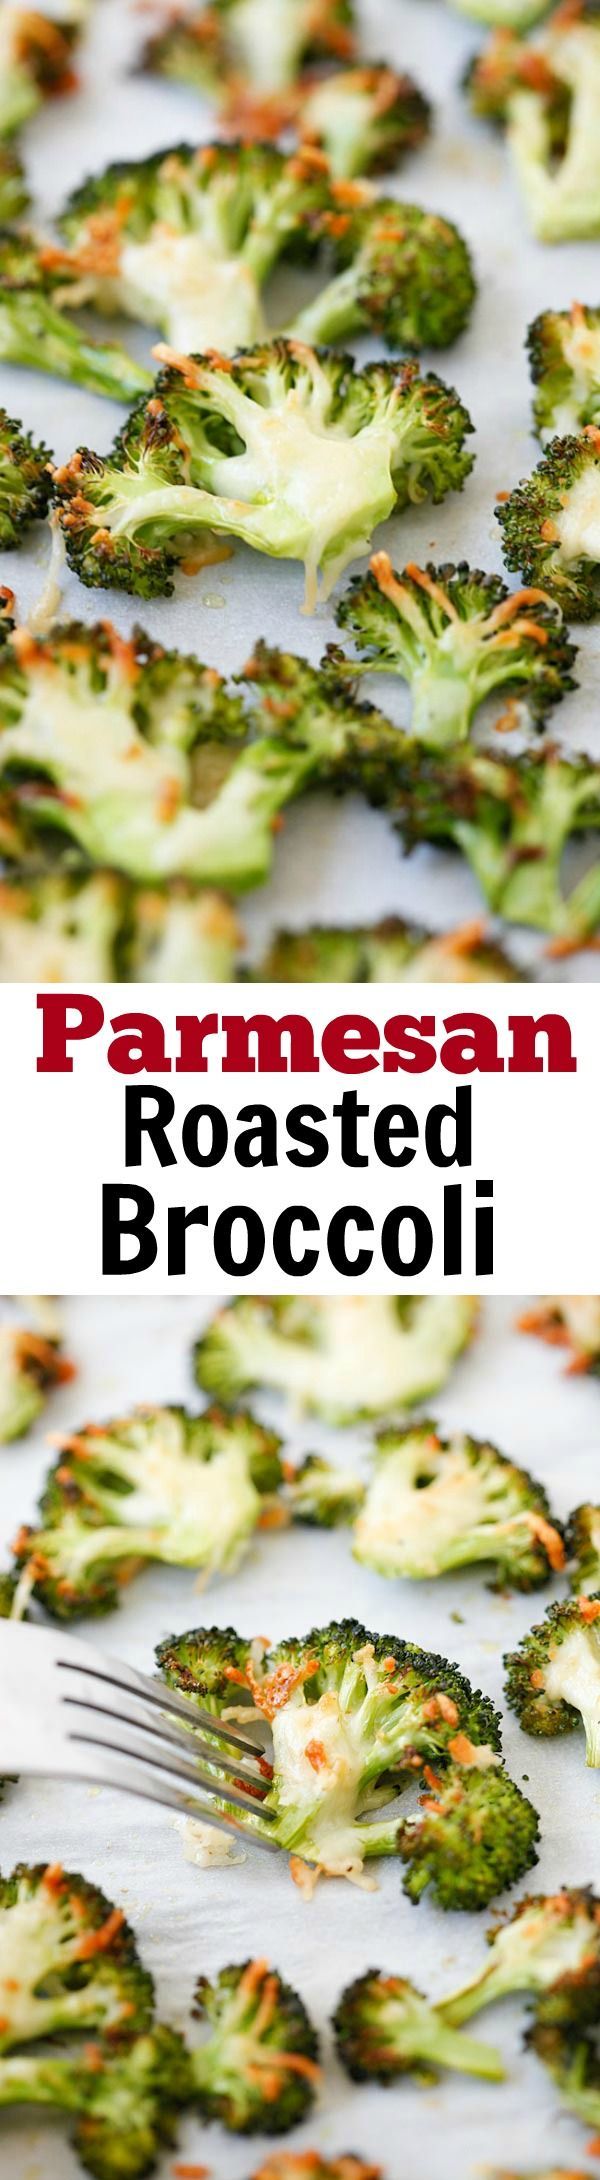 Parmesan Roasted Broccoli – easy delicious roasted broccoli recipe, with Parmesan cheese. 5 mins prep and 20 mins to dinner